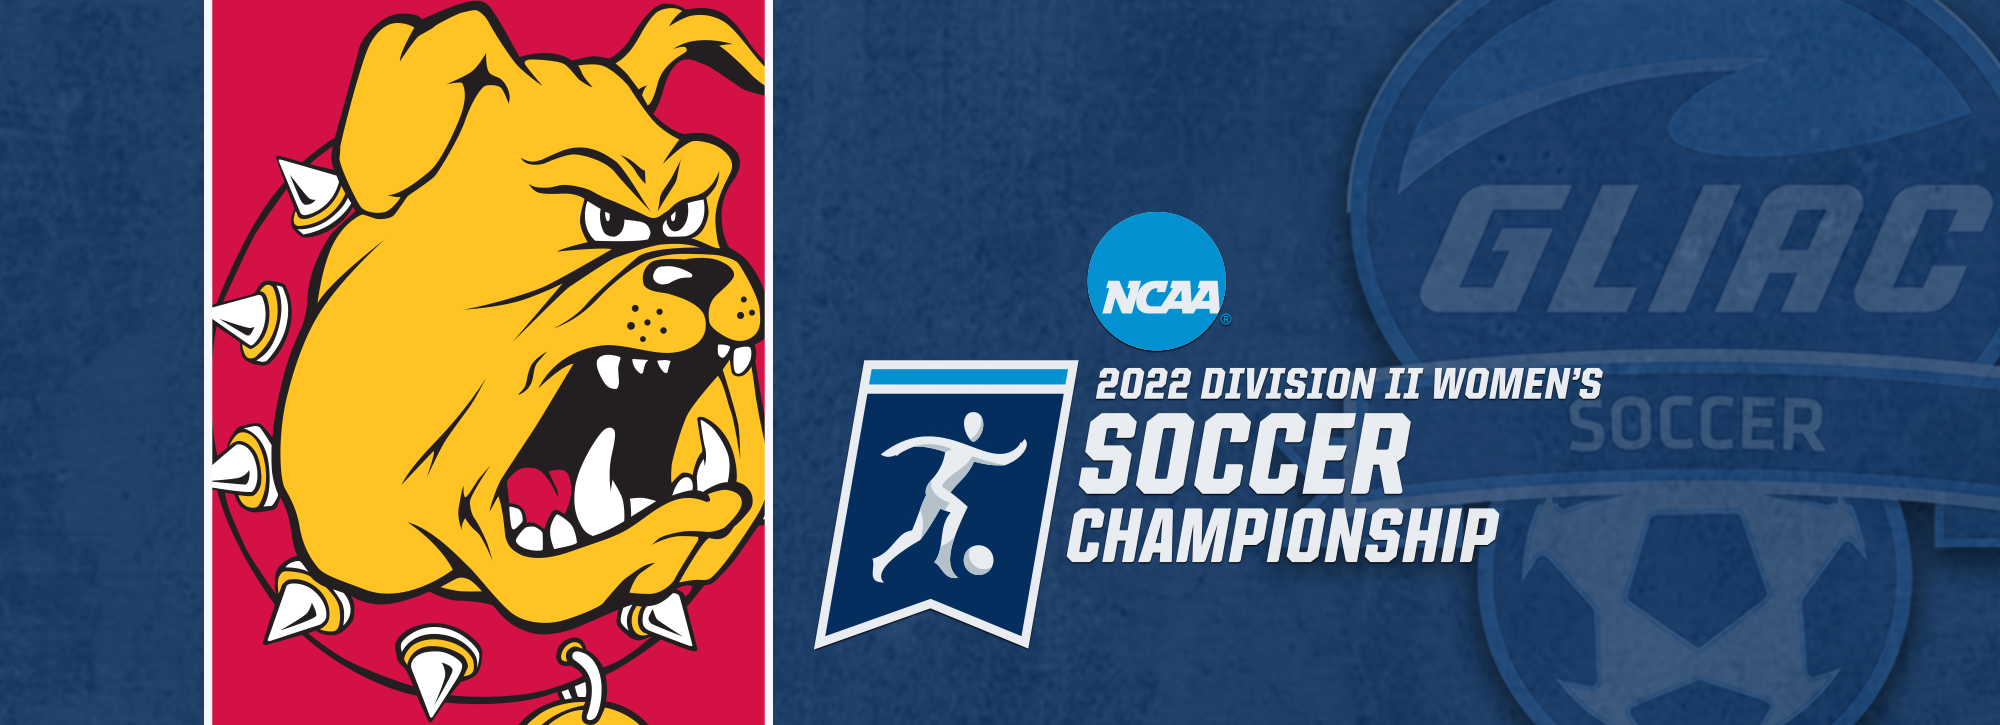 Final Four: Ferris State women's soccer faces West Chester in NCAA semifinals in Seattle